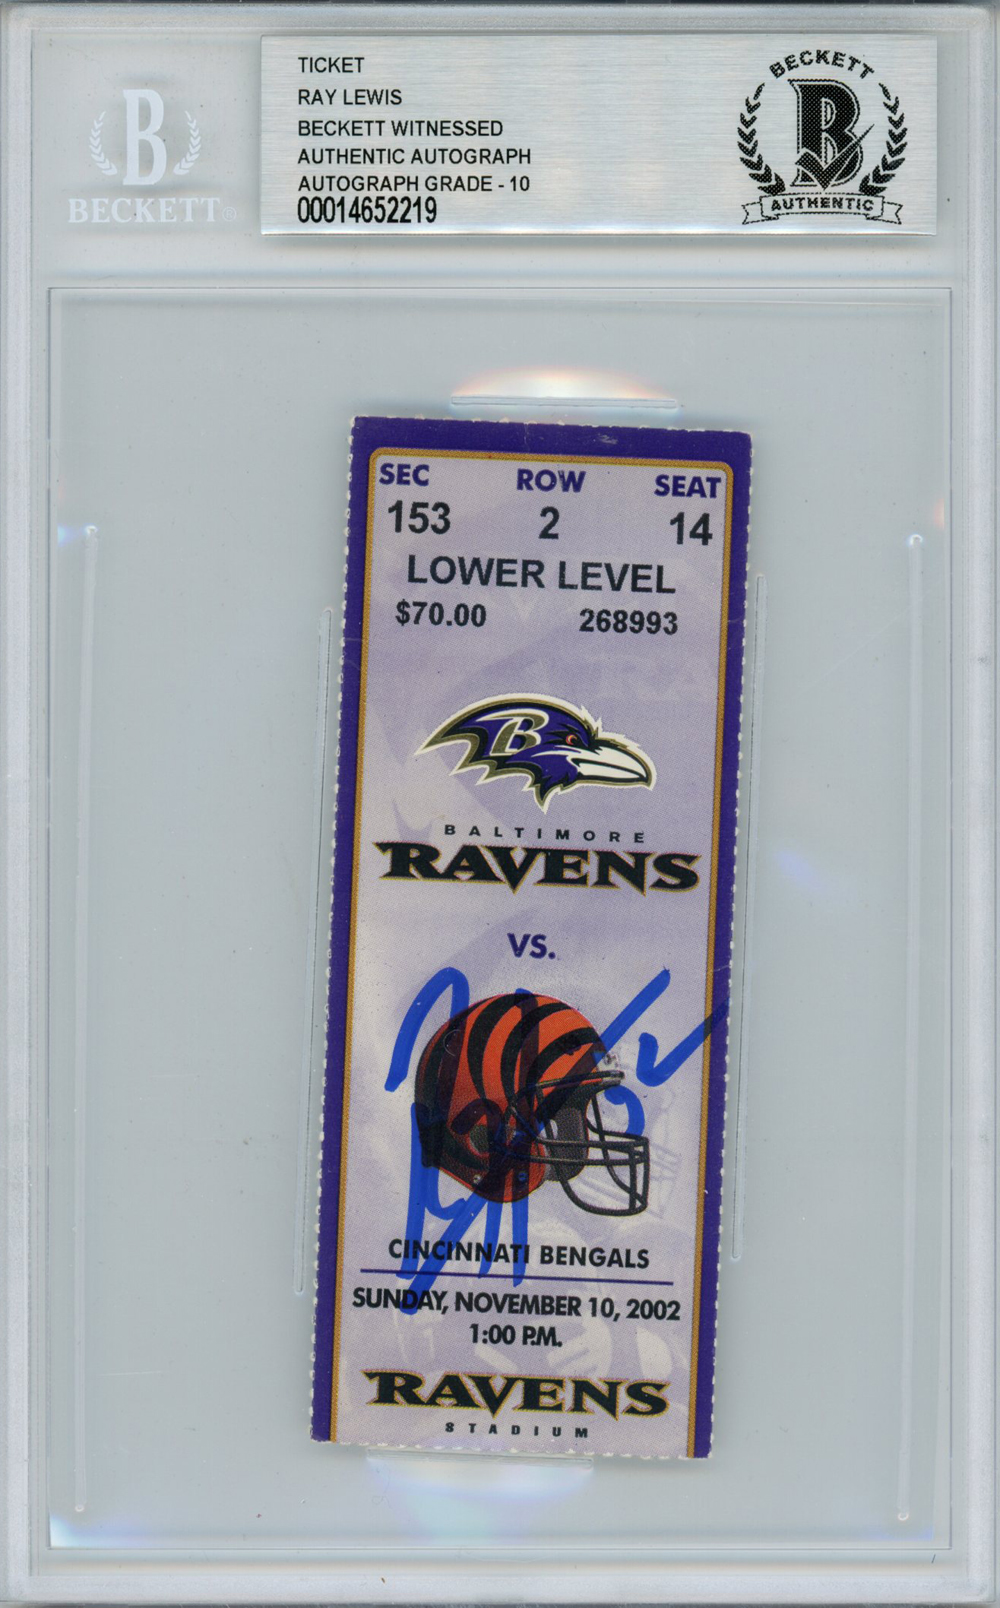 Ray Lewis Autographed/Signed 11/10/2002 vs Bengals Ticket Beckett Slab